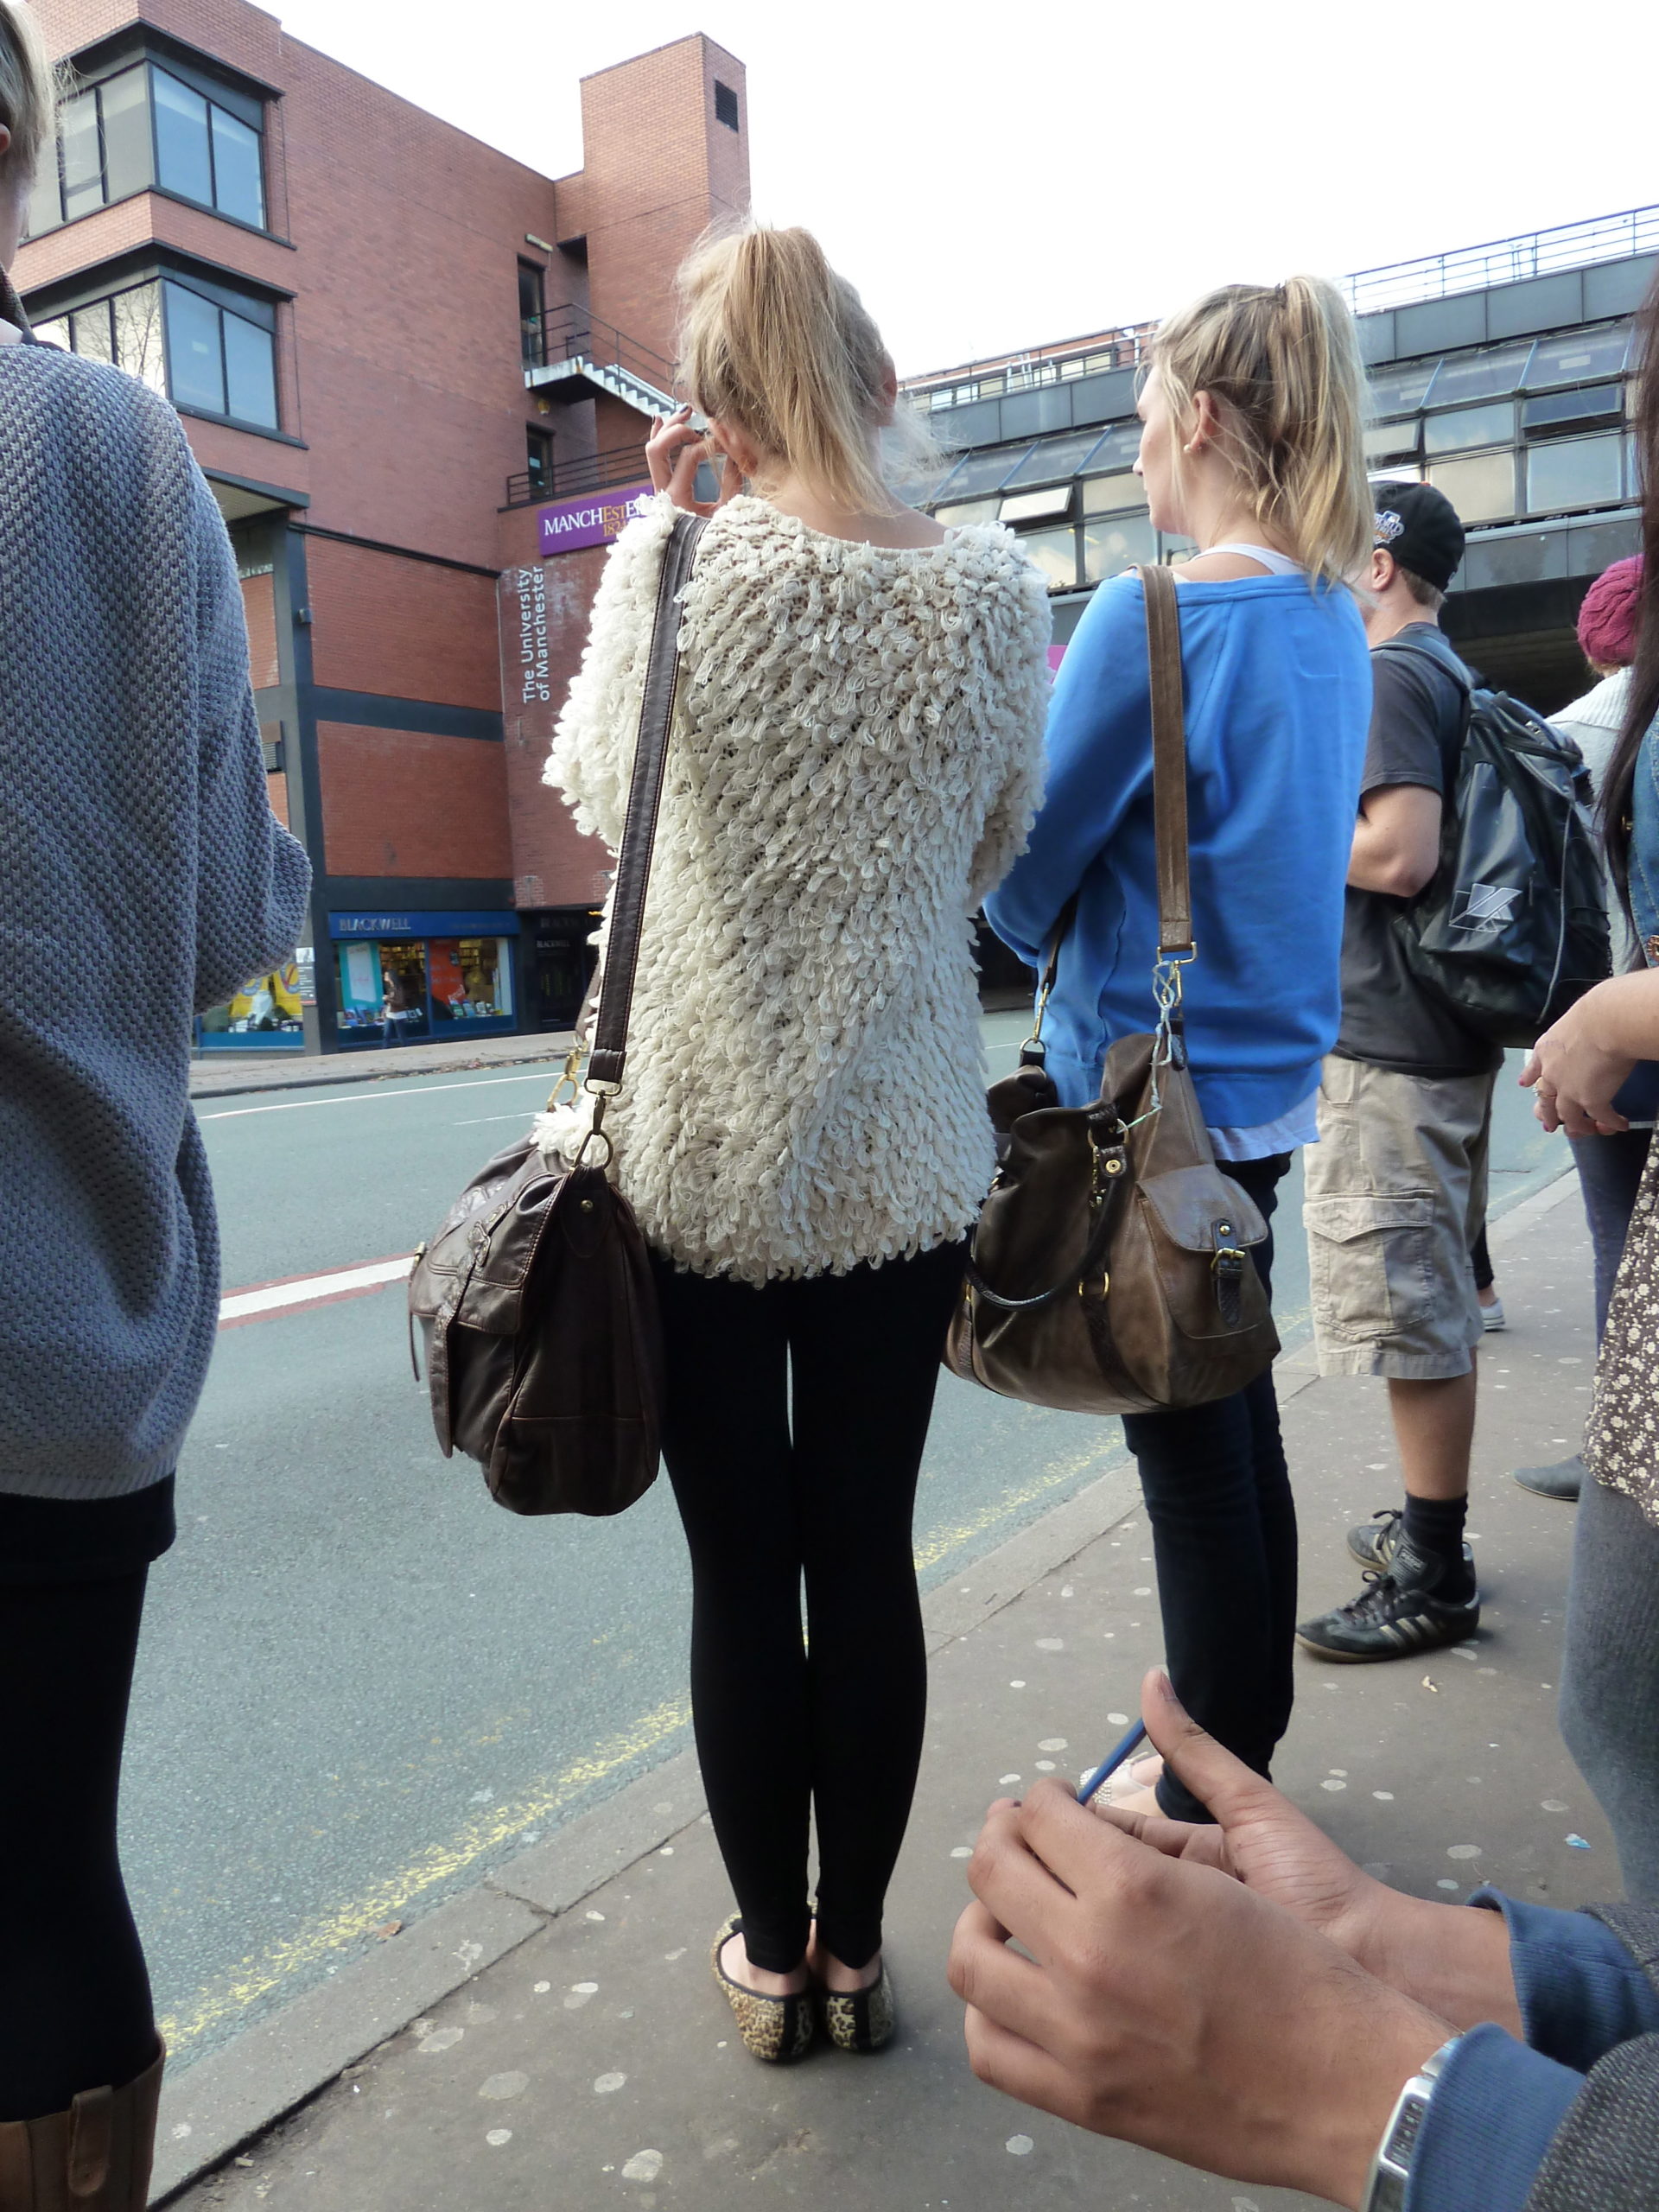 Absolutely nothing wrong with leggings! Just different to see it all the time and everywhere.